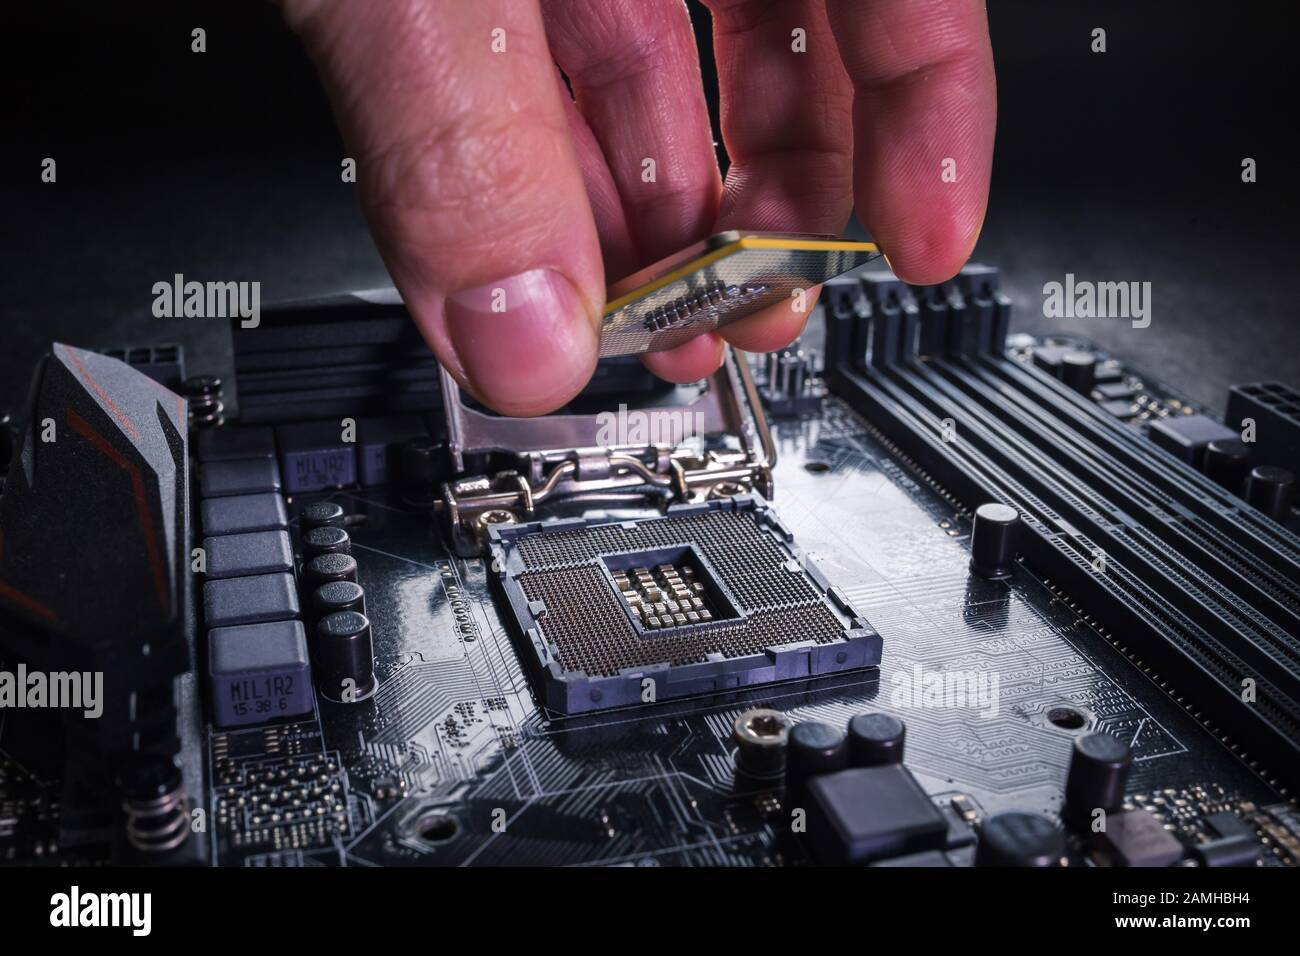 Installing modern central processor unit into motherboard. Copmputer CPU upgrade or repair concept. Stock Photo